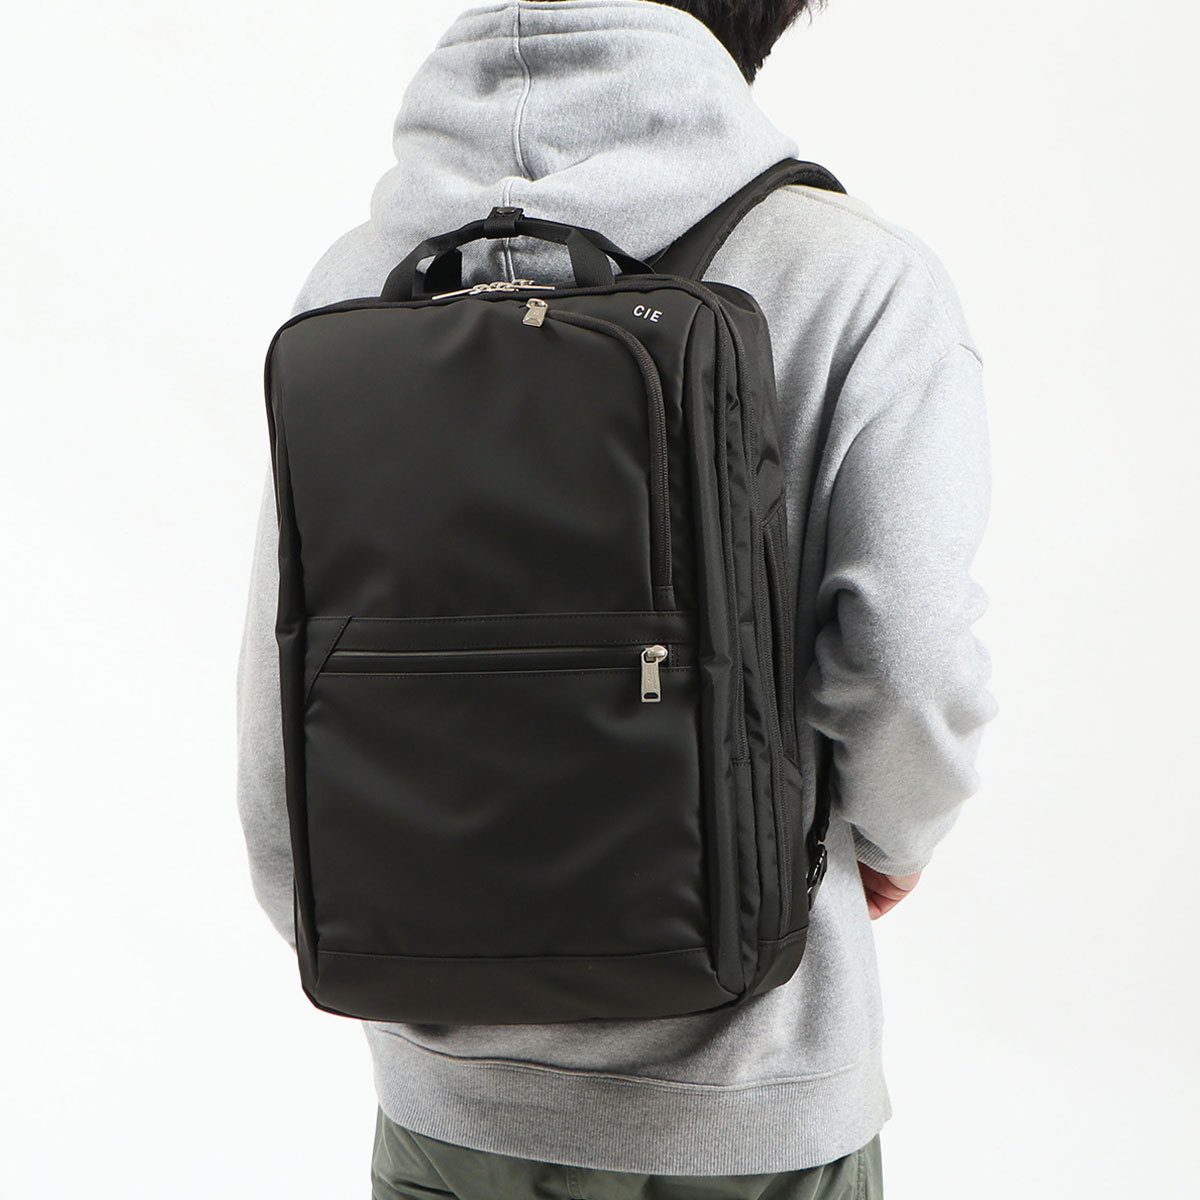 CIE リュック シー VARIOUS 2WAYBACKPACK - L ヴァリアス 2WAY 通学...